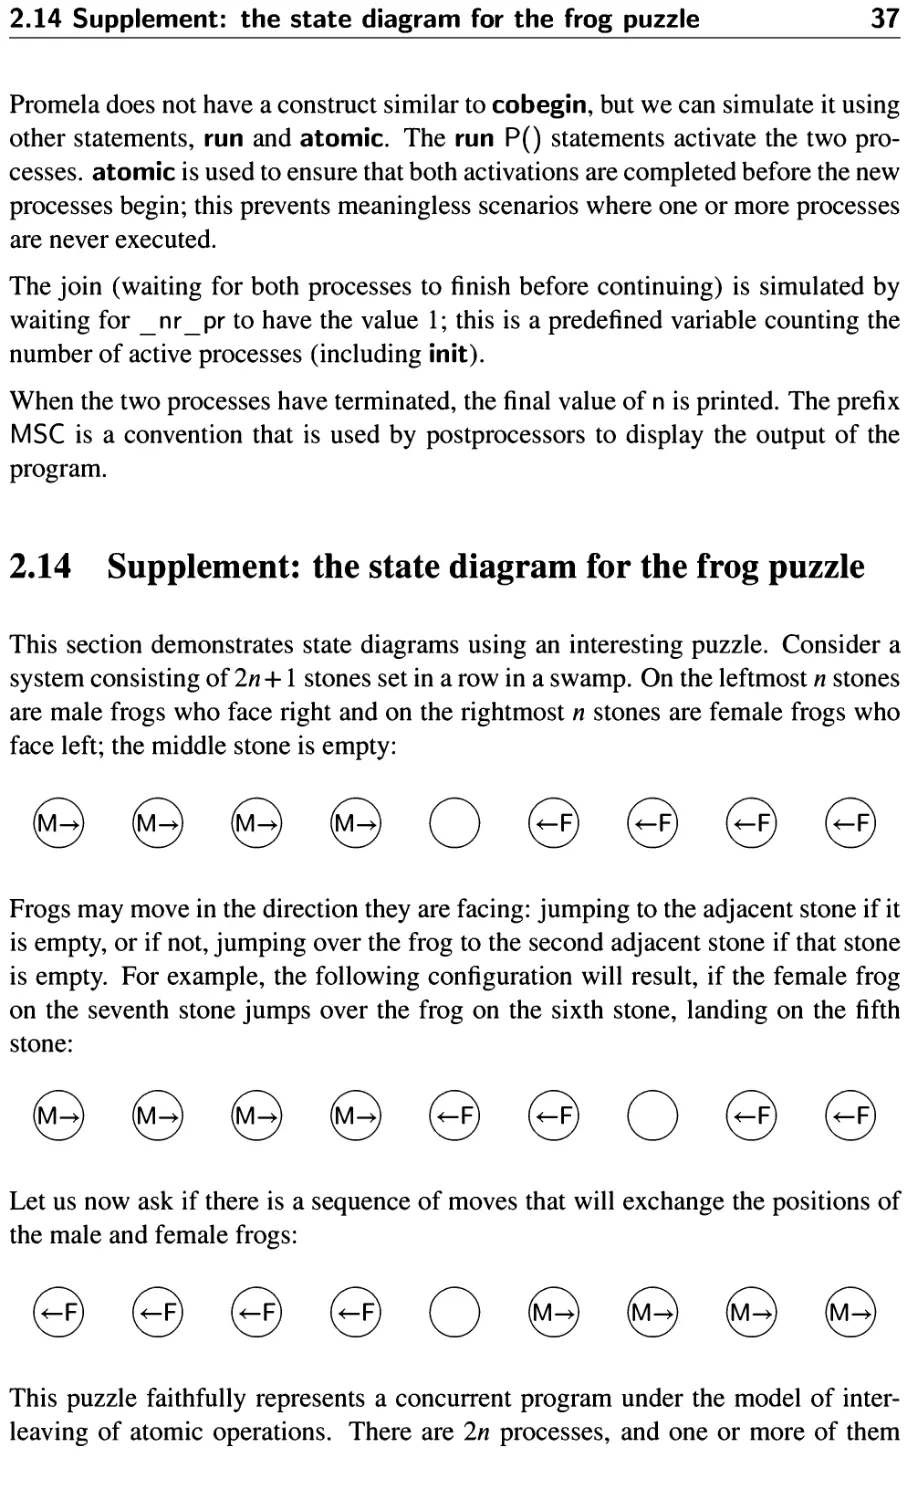 2.14 Supplement: the state diagram for the frog puzzle